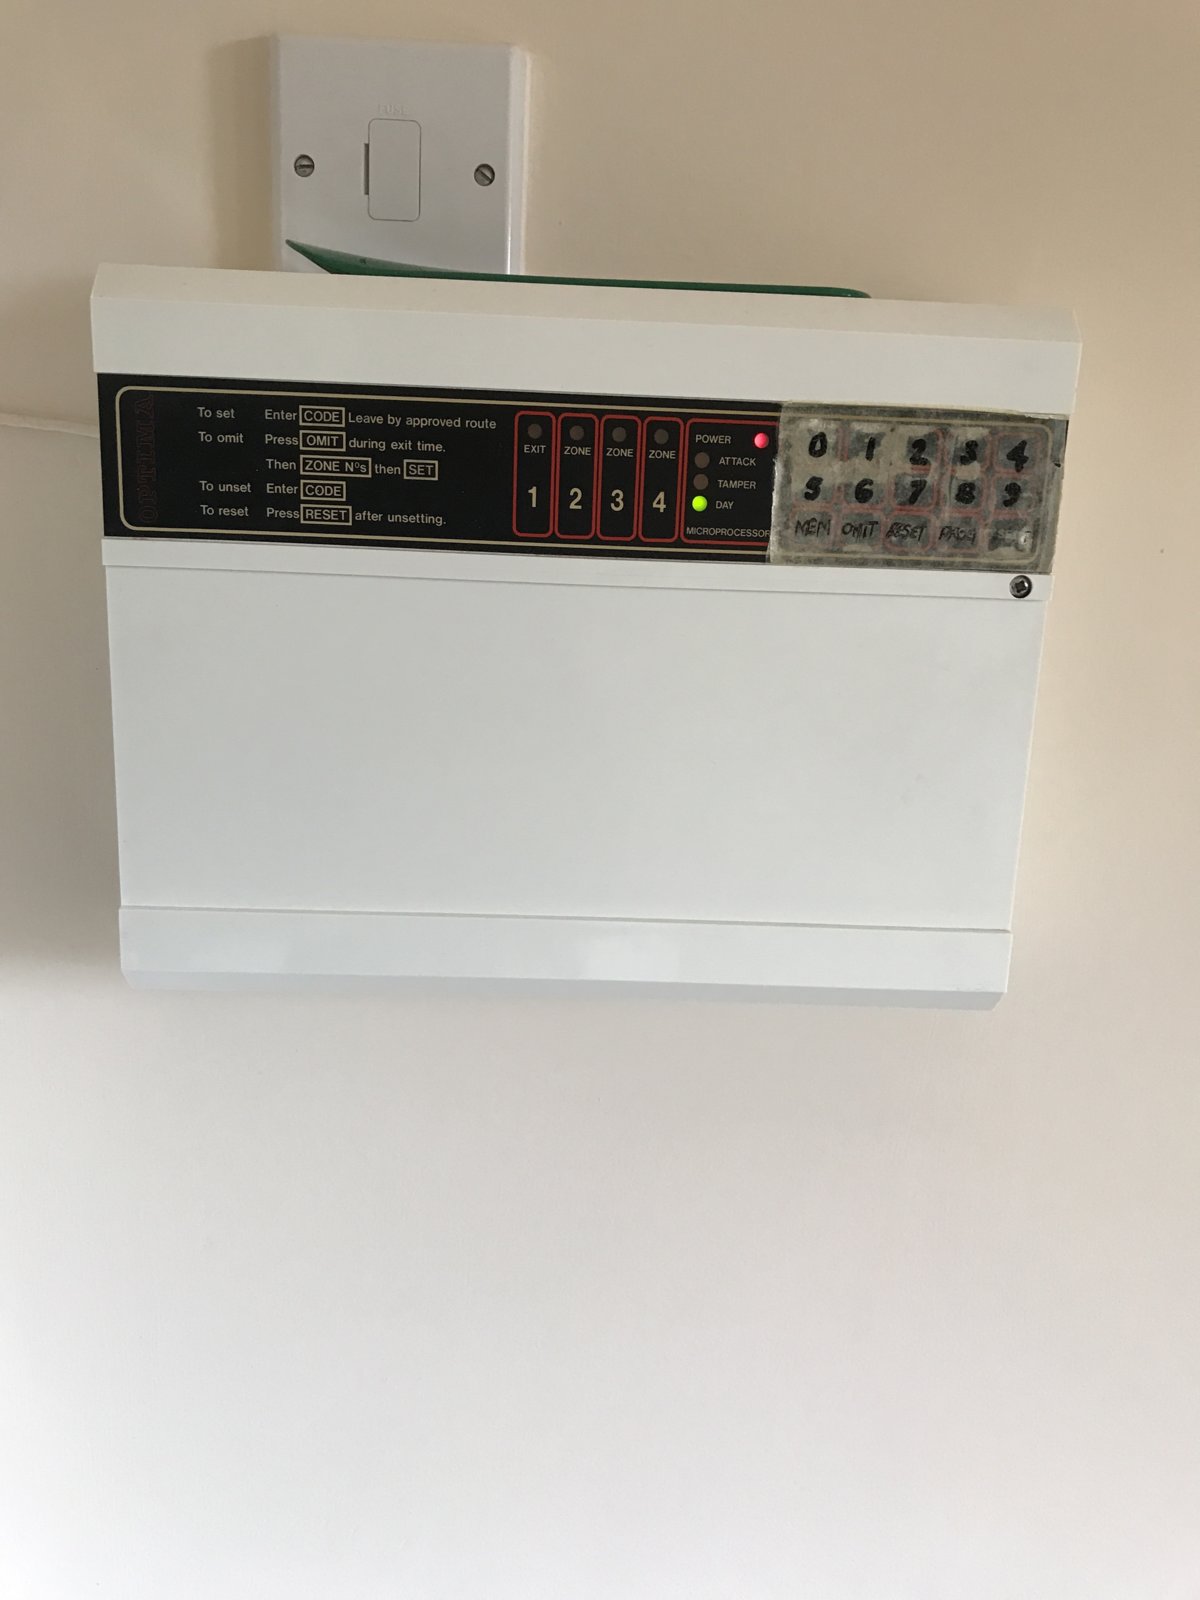 Old Optima Alarm Panel Diynot Forums Of Search Replace